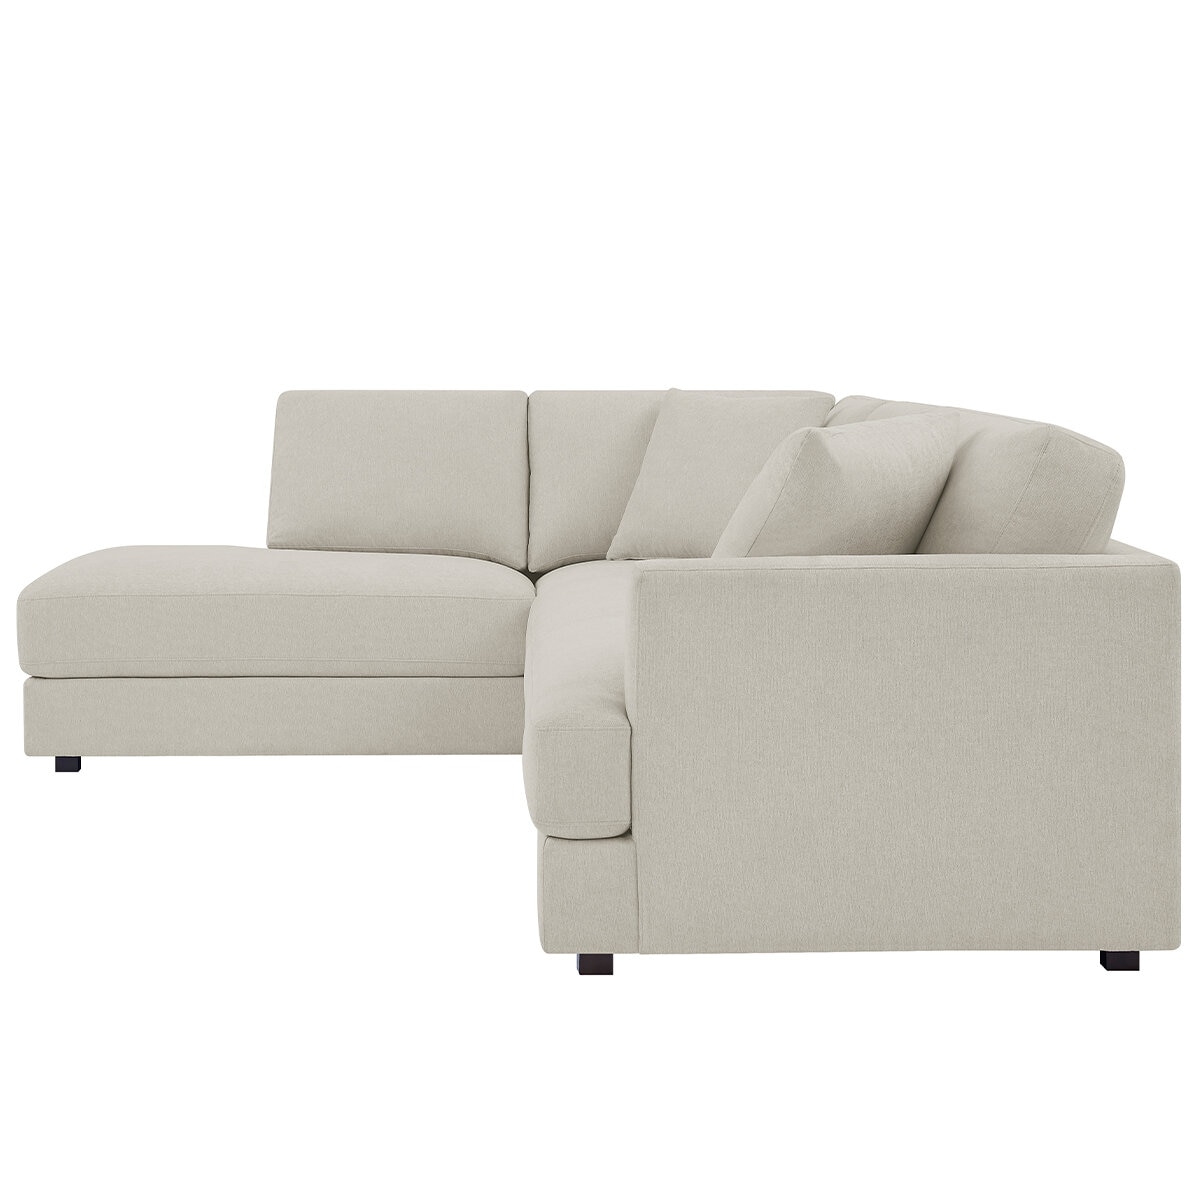 Thomasville 2 Piece Fabric Sectional